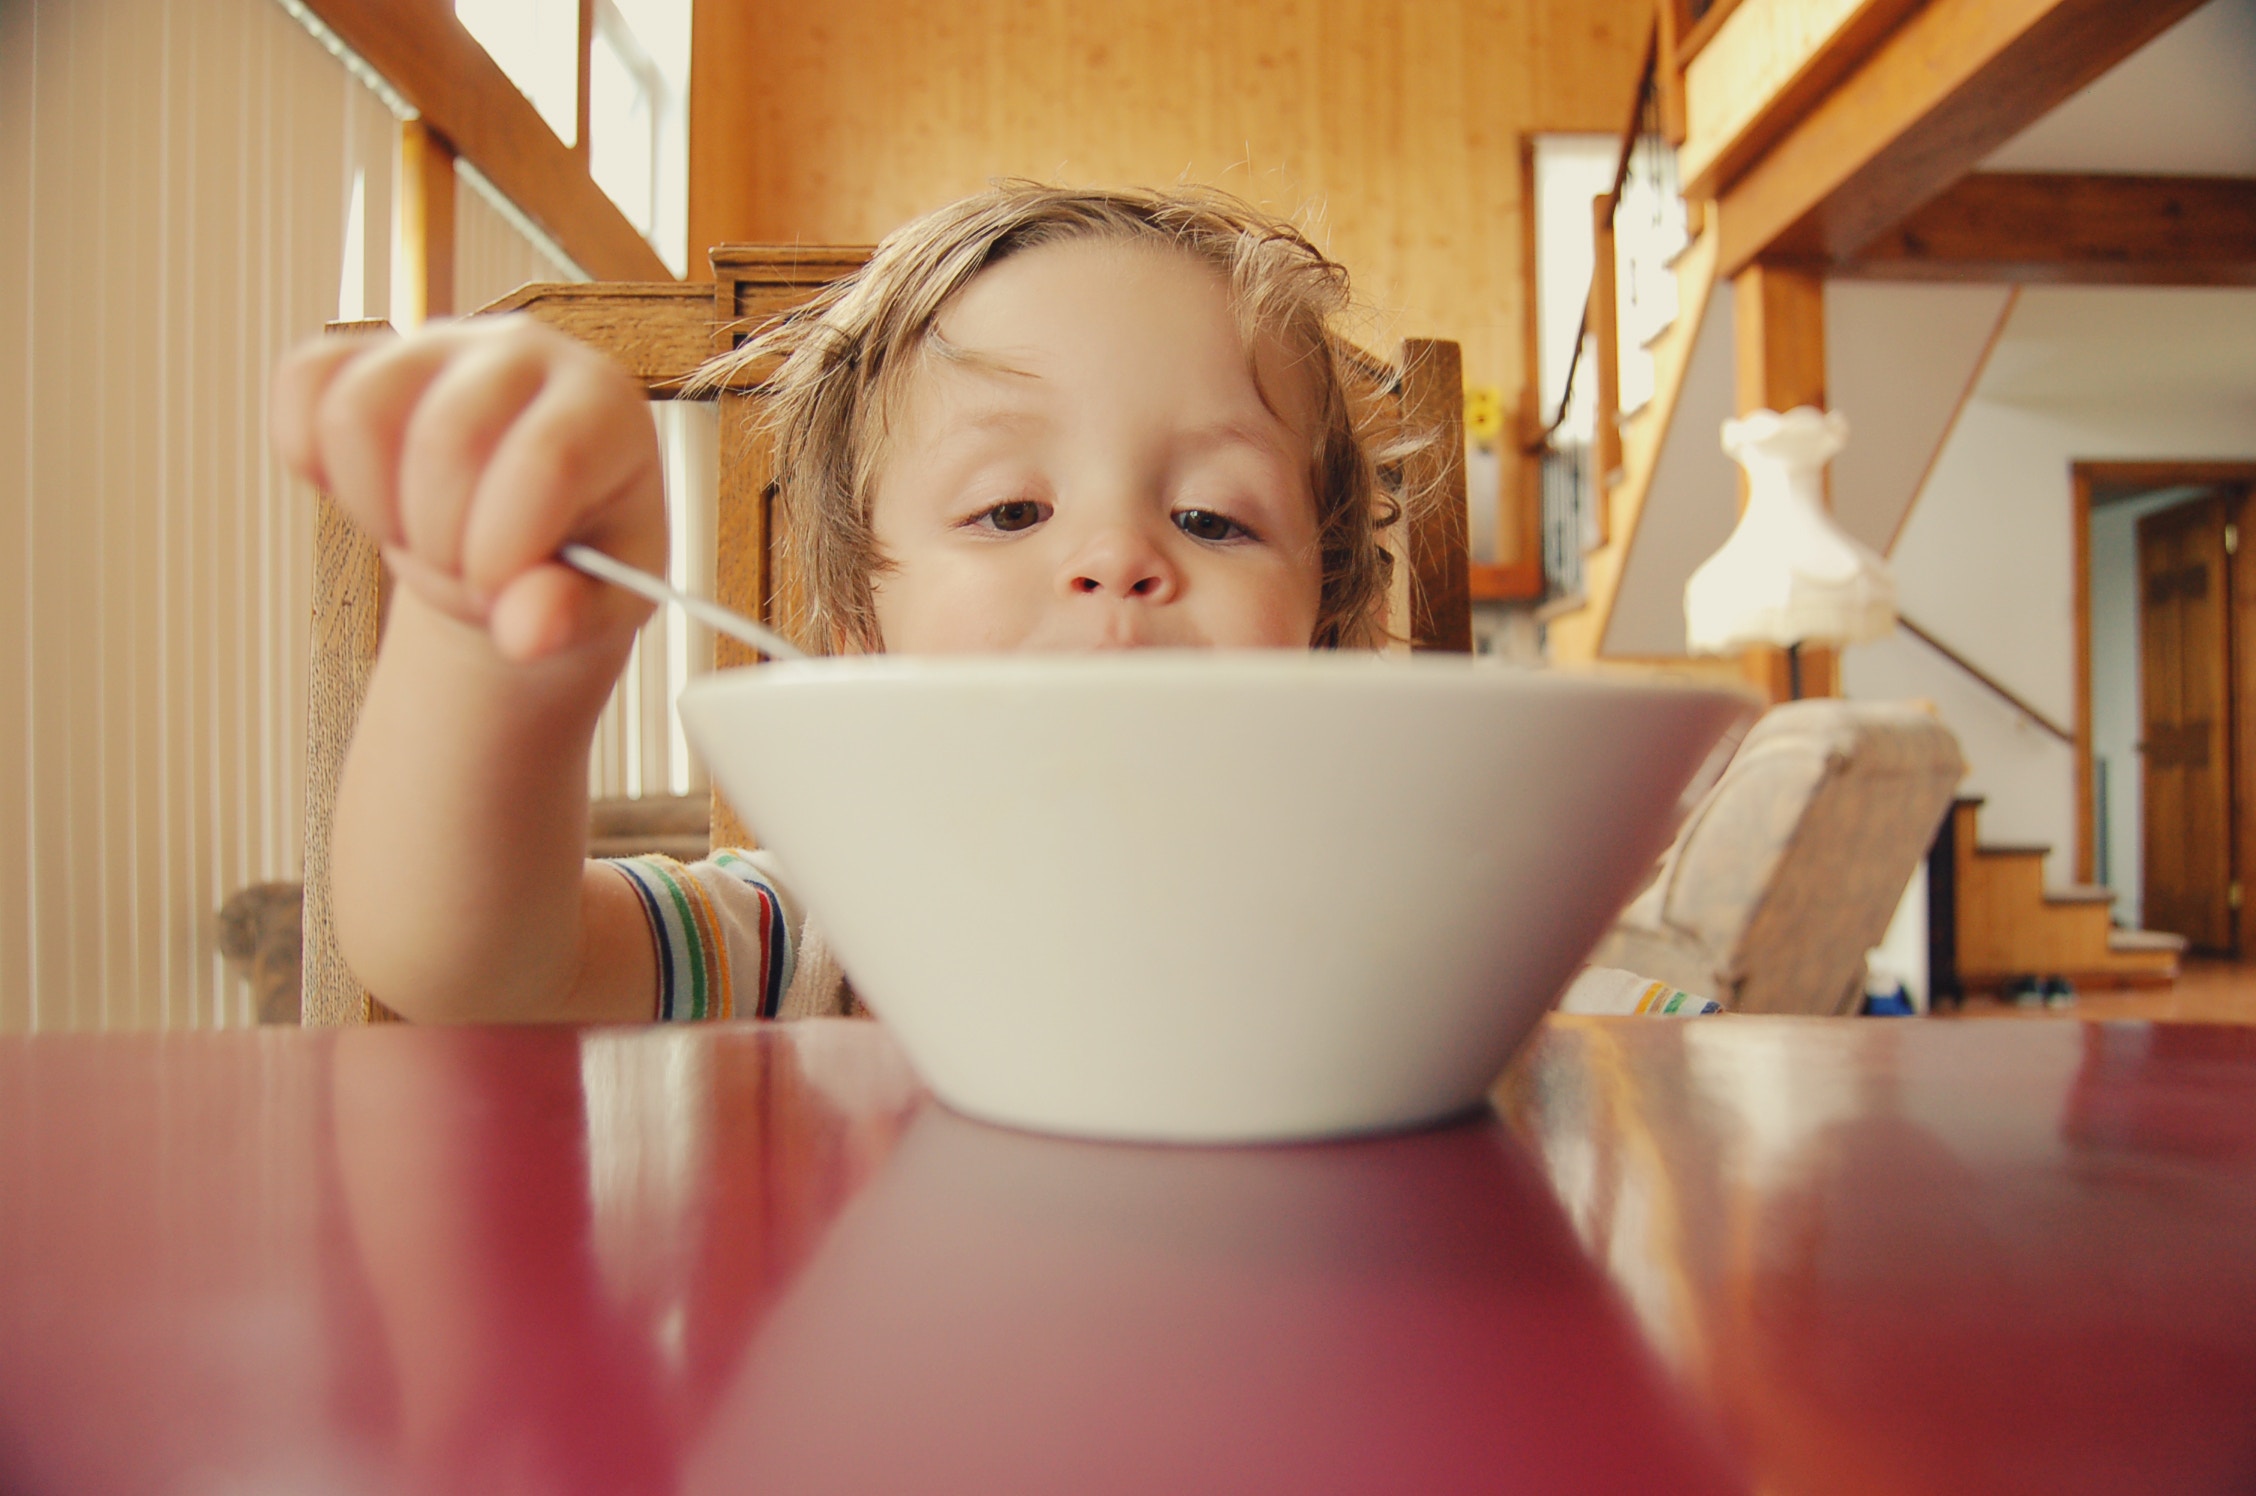 Small boy eating from a large bowl.